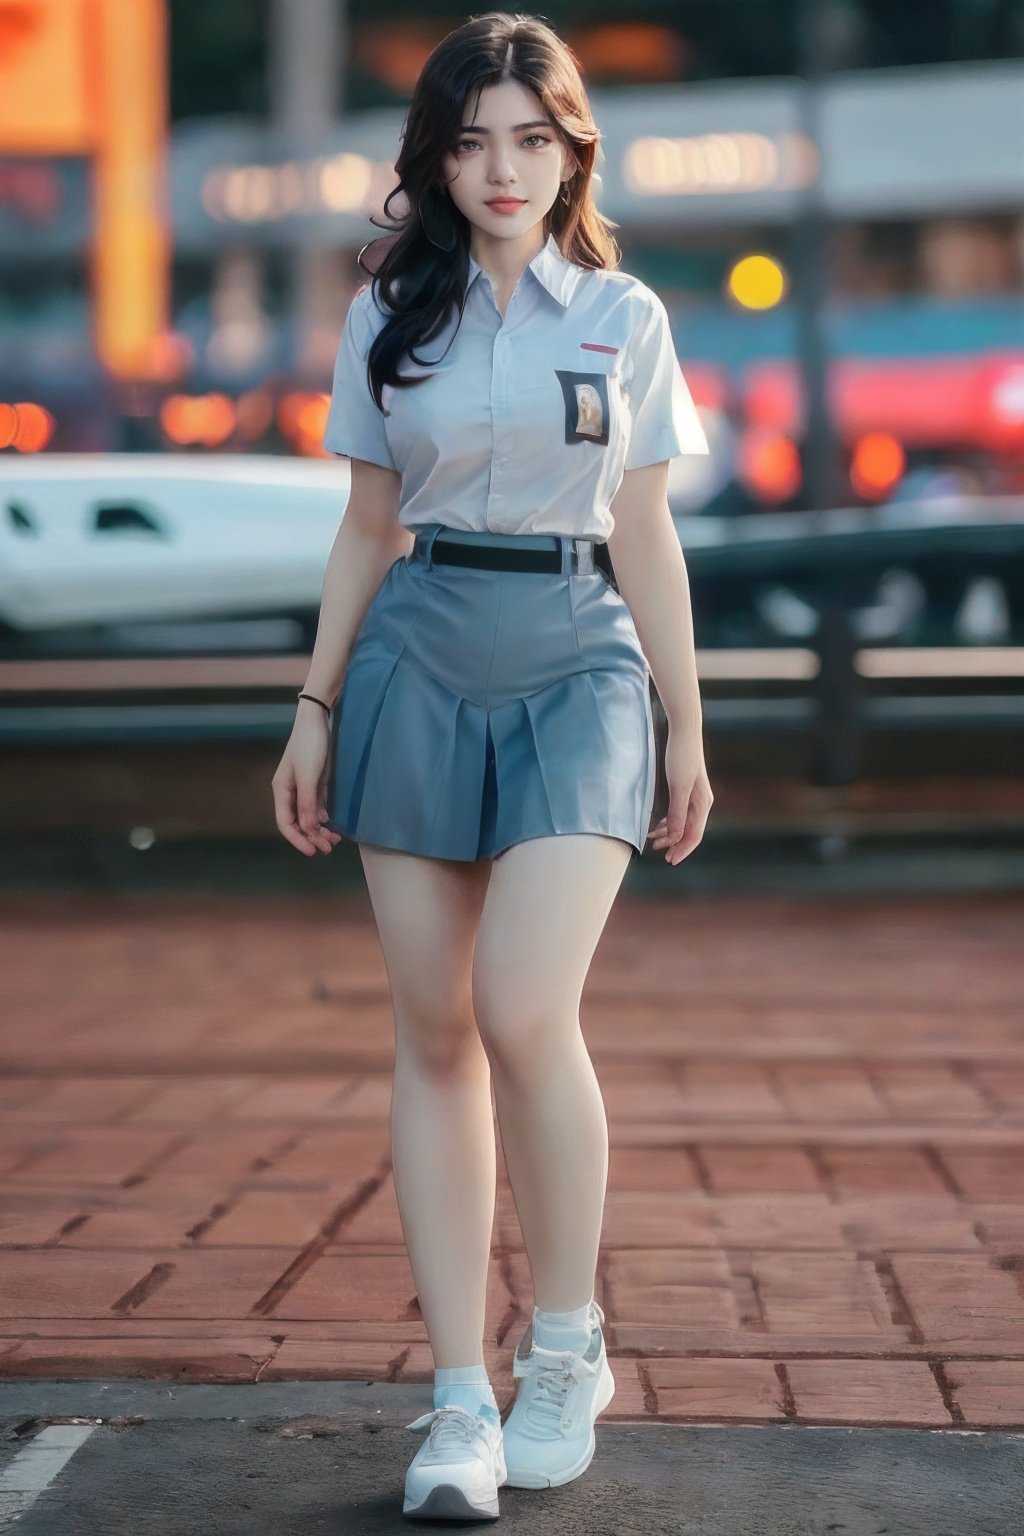 cinematic photo sm4c3w3k, white clothes,full body  photo of the most beautiful woman in the world wearing the sm4c3w3k, collared shirt,short sleeves, grey skirt, pocket,<lora:sm4c3w3k-05:1>  . 35mm photograph, film, bokeh, professional, 4k, highly detailed